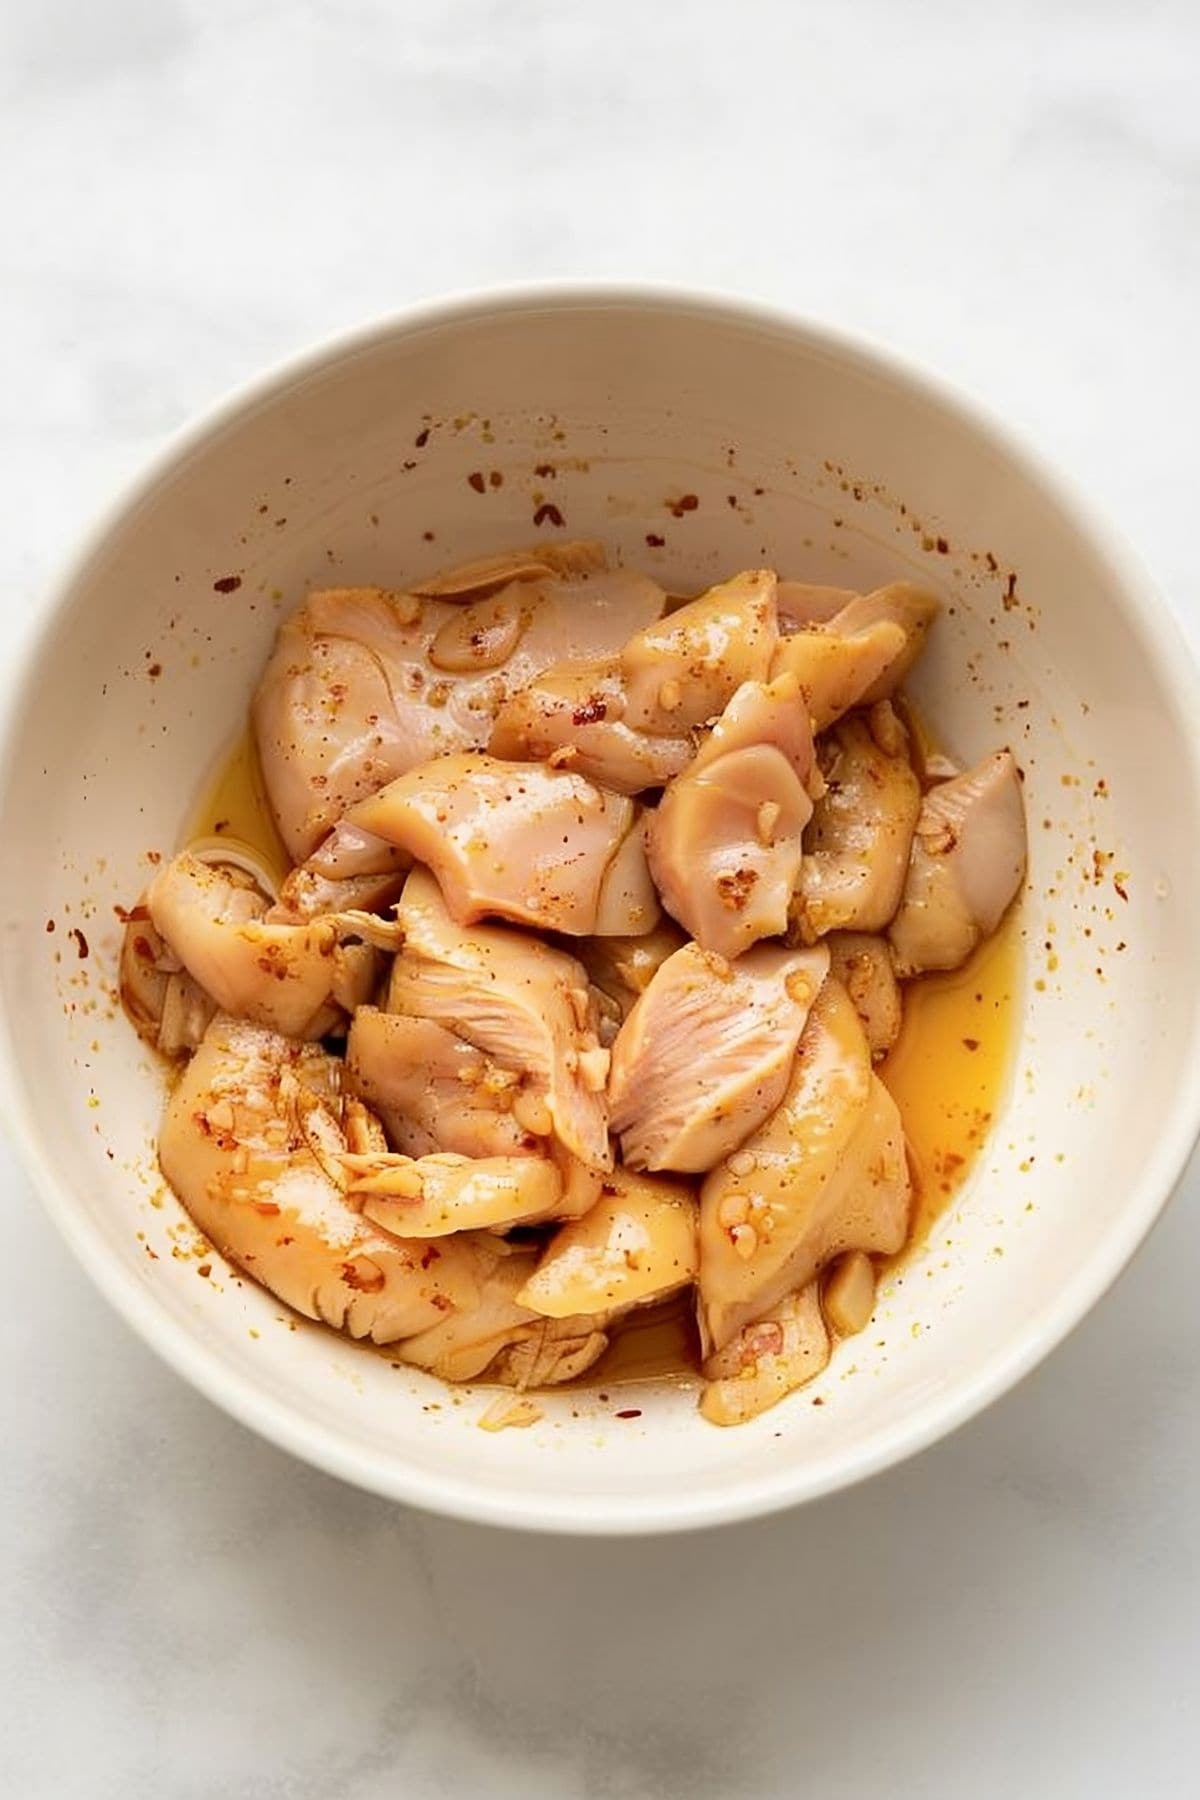 Top view of marinated sliced skinless chicken in a bowl